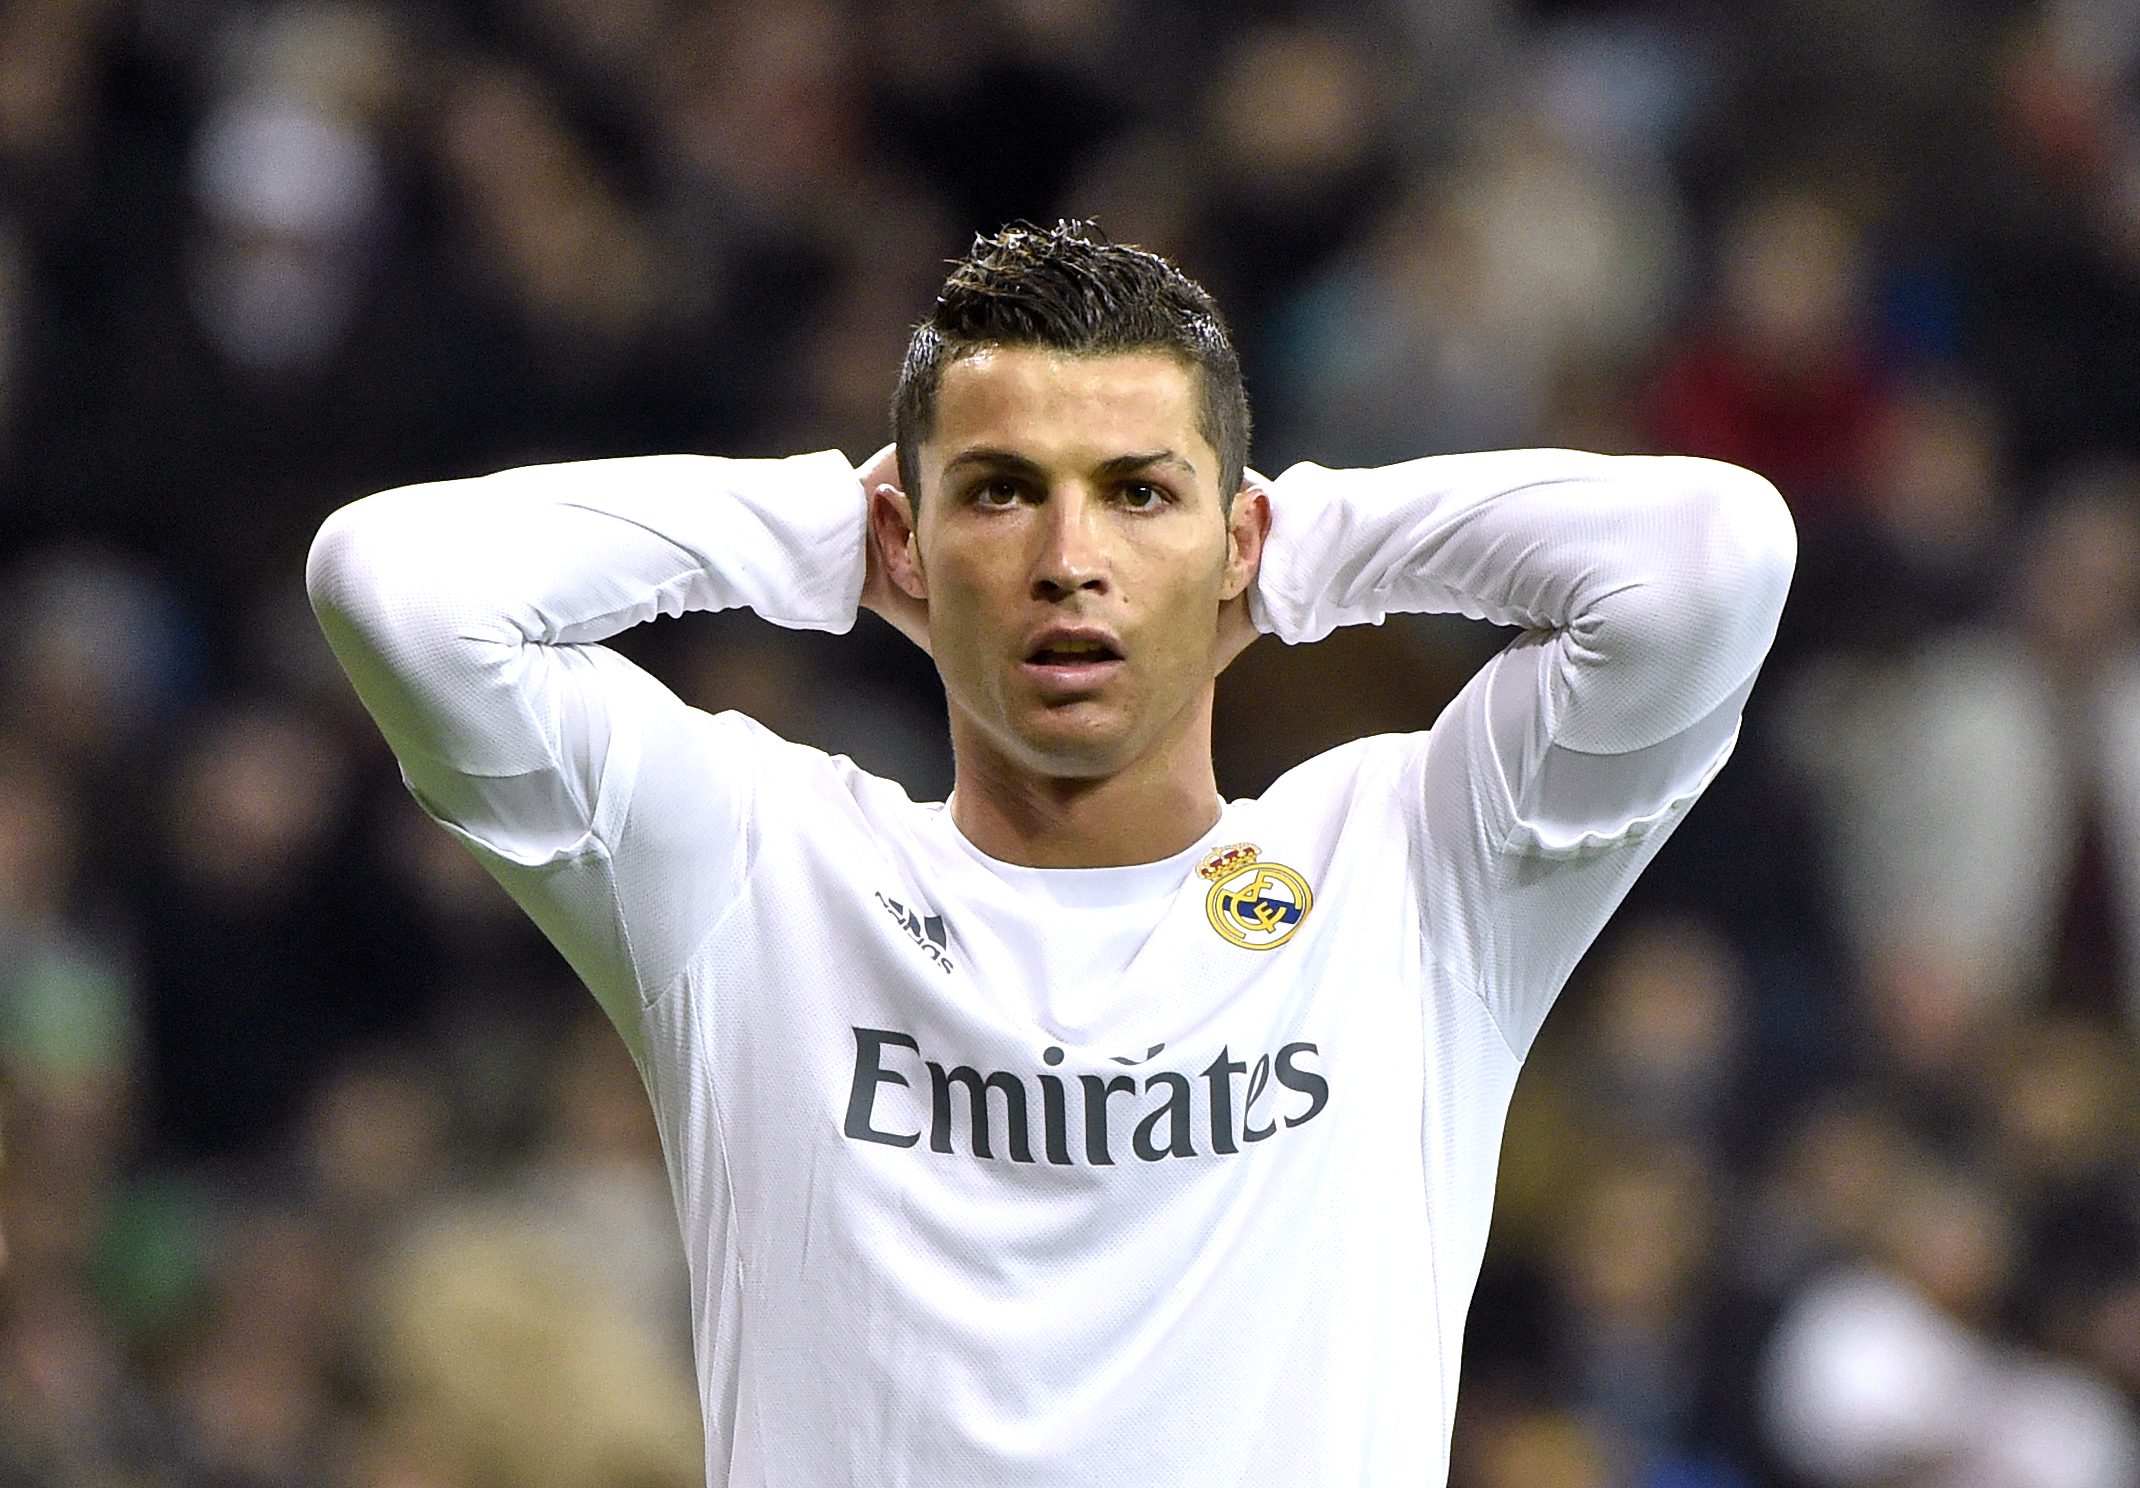 Real Madrid's Cristiano Ronaldo rues a missed chance. Photo: AFP